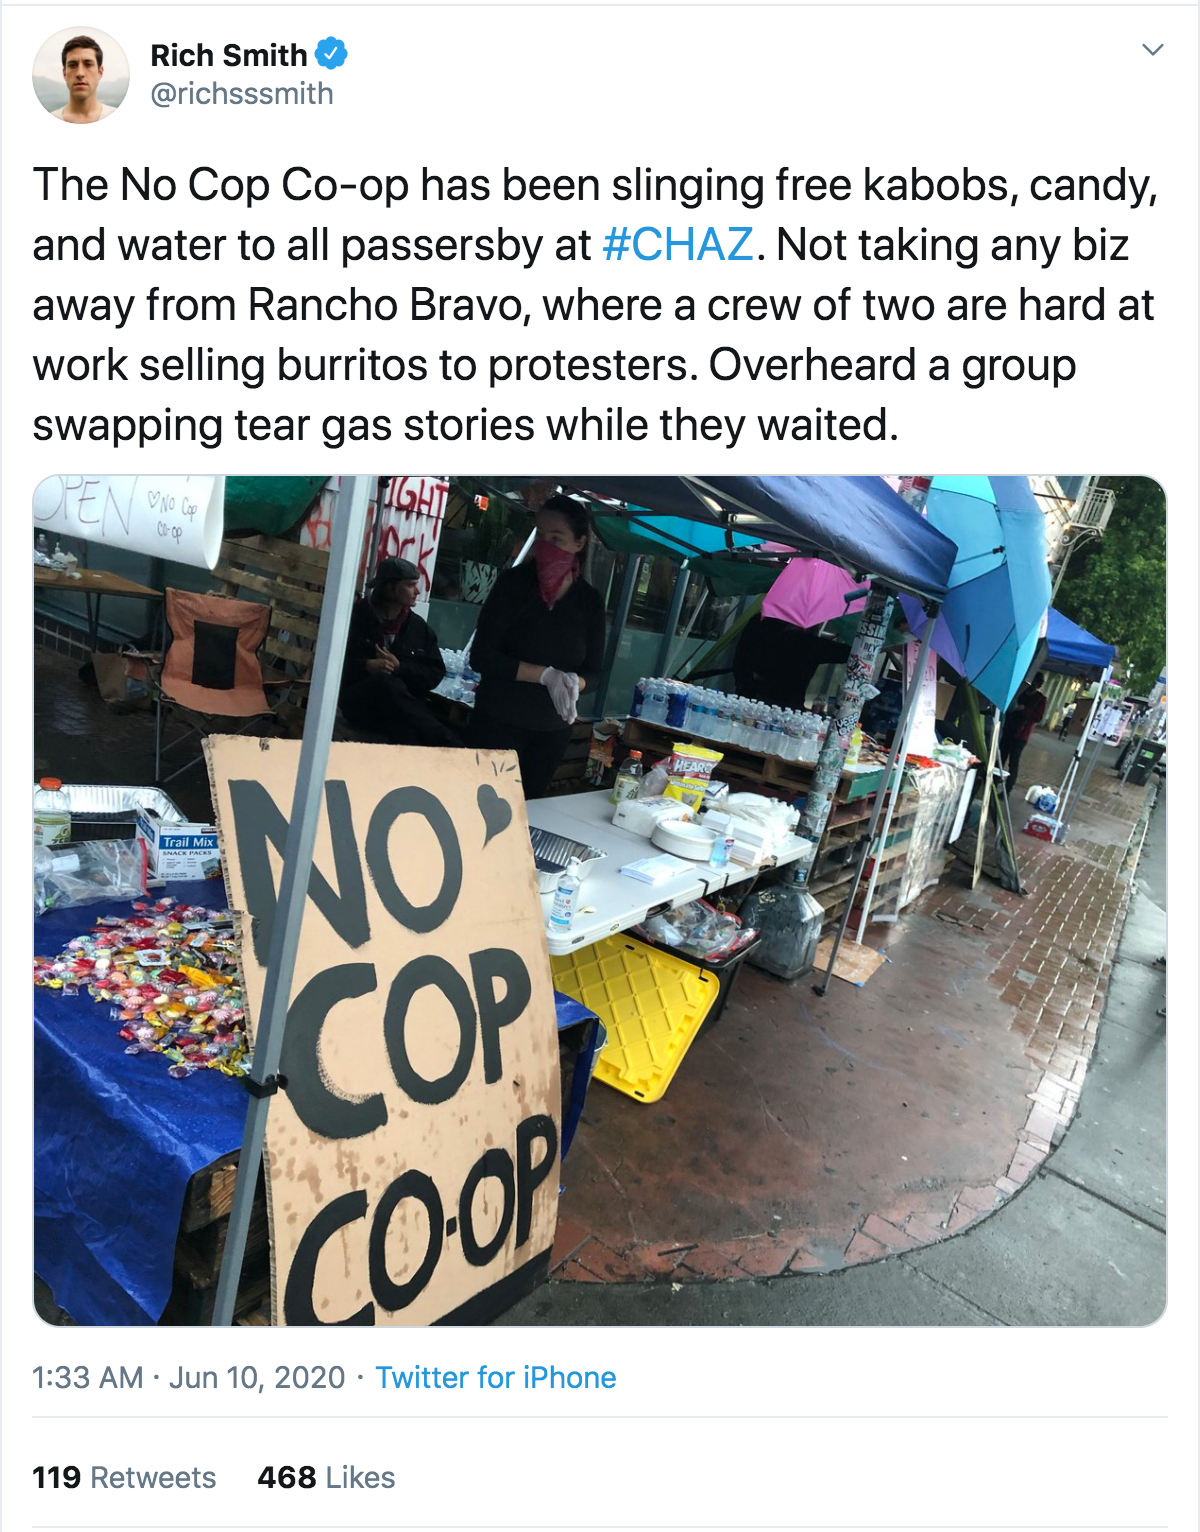 And so far, things have been peaceful (duh). People have set up farmers' markets (shocking) and have been playing music and selling food in the streets. 